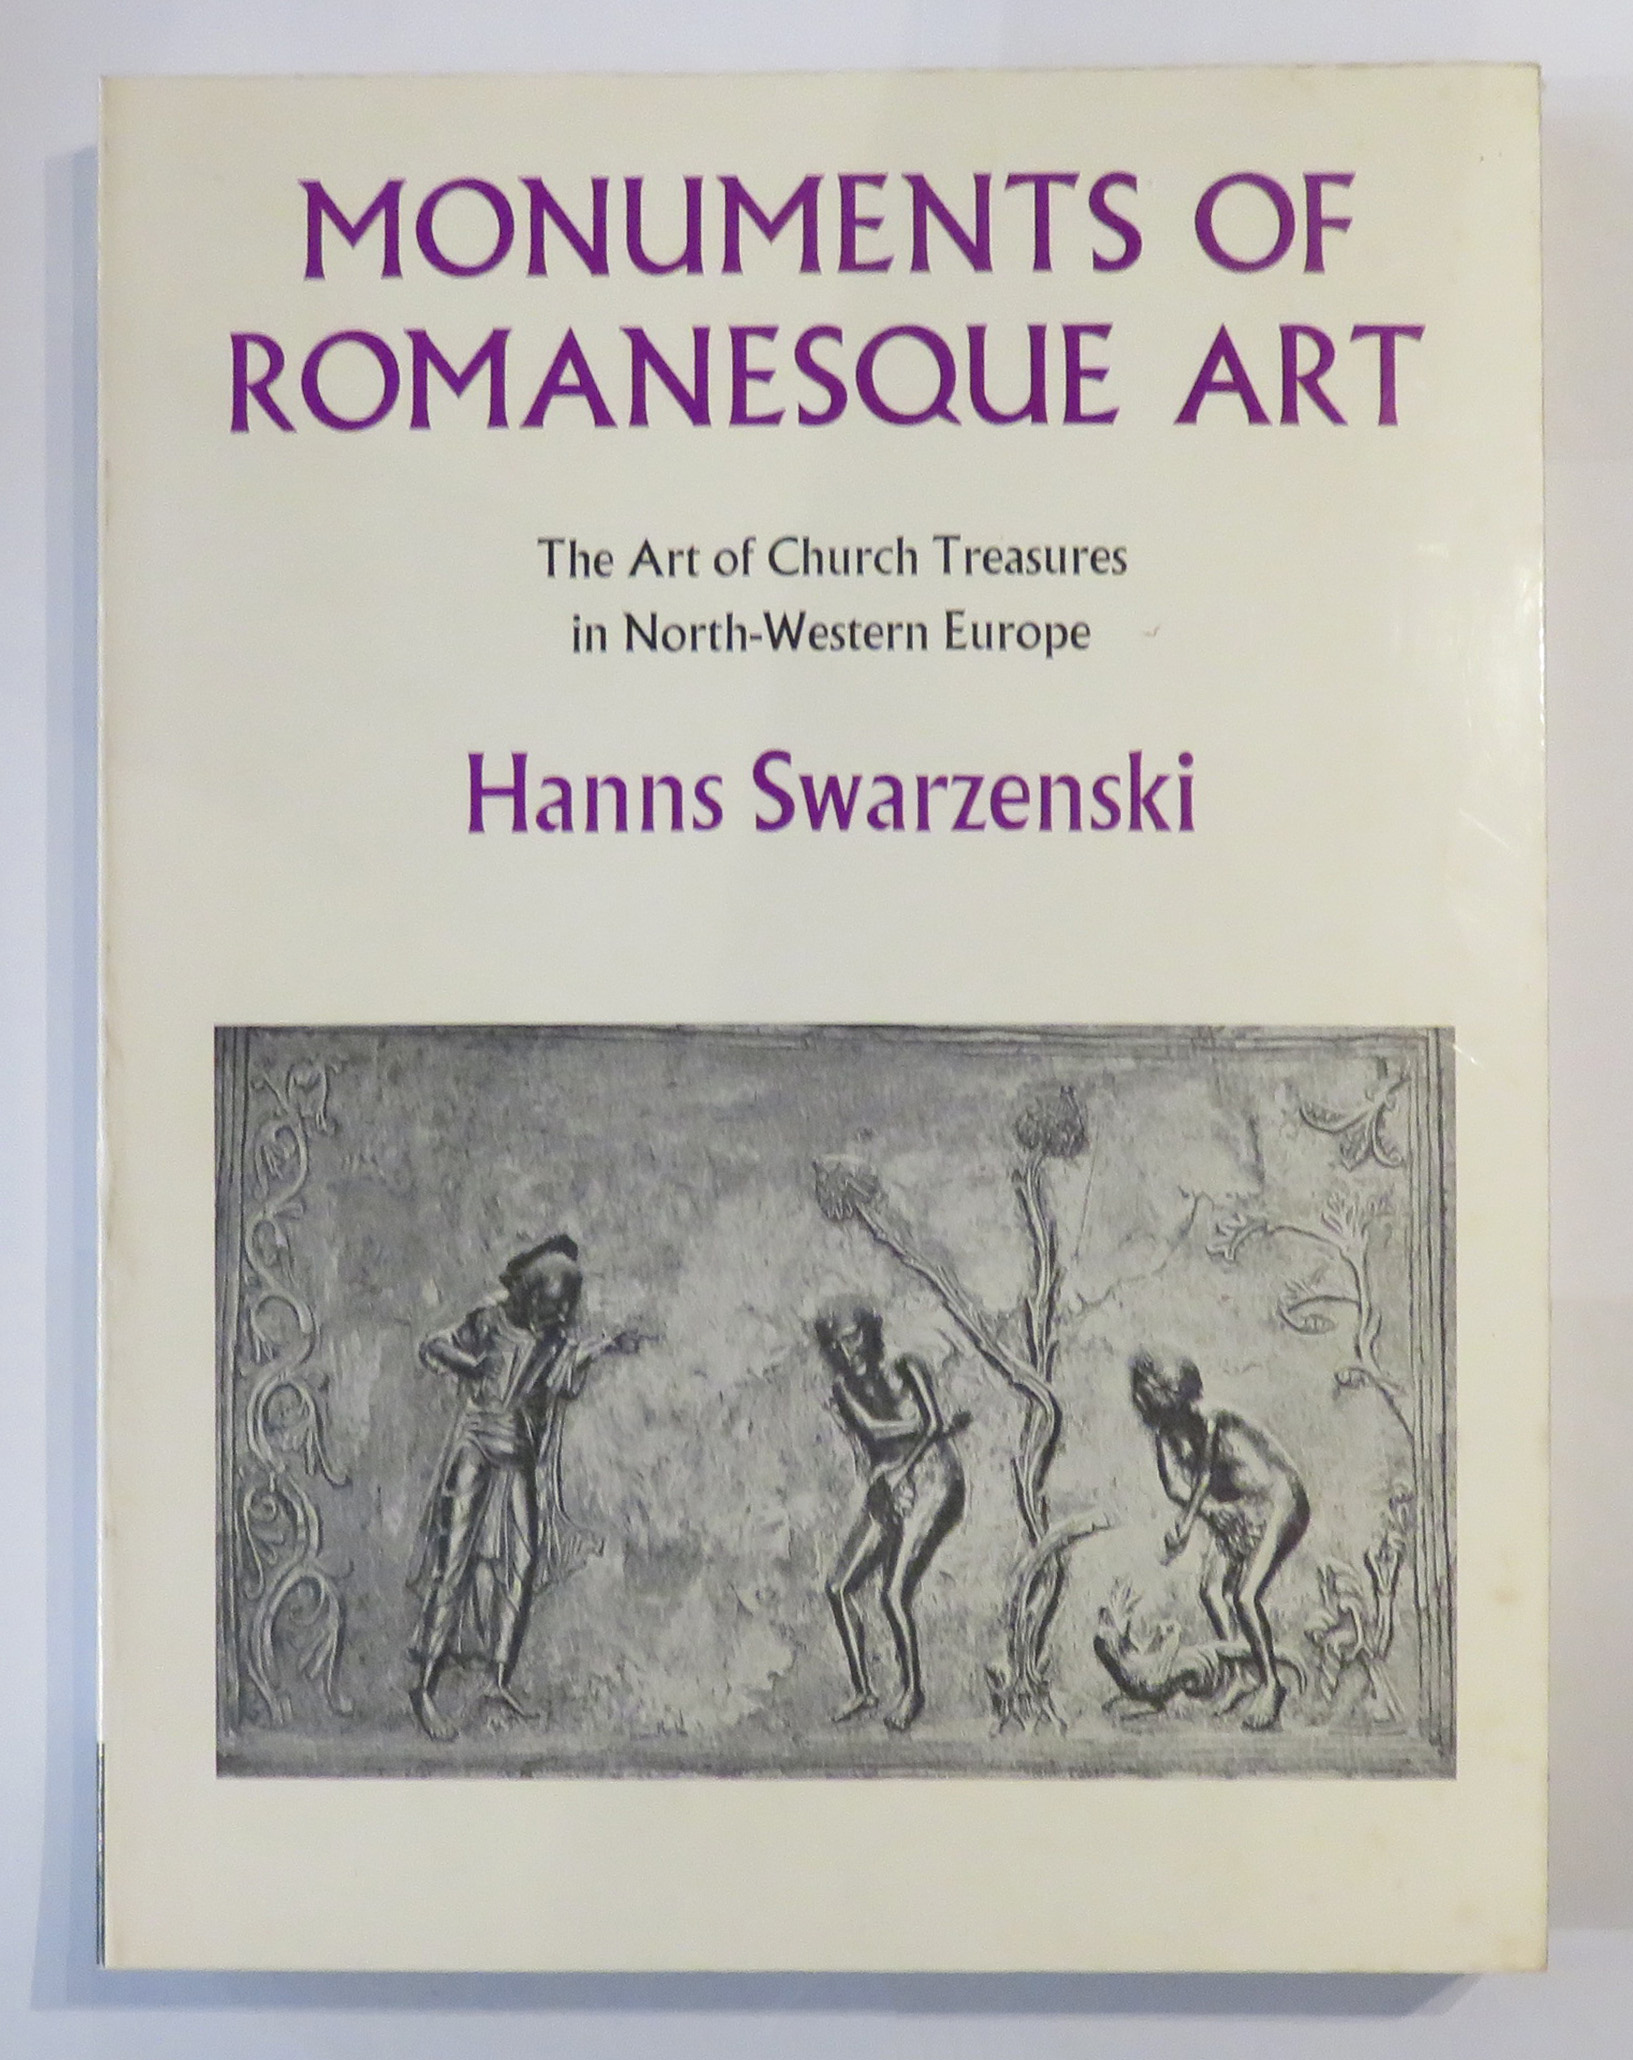 Monuments of Romanesque Art. The Art of Church Treasures in North-Western Europe